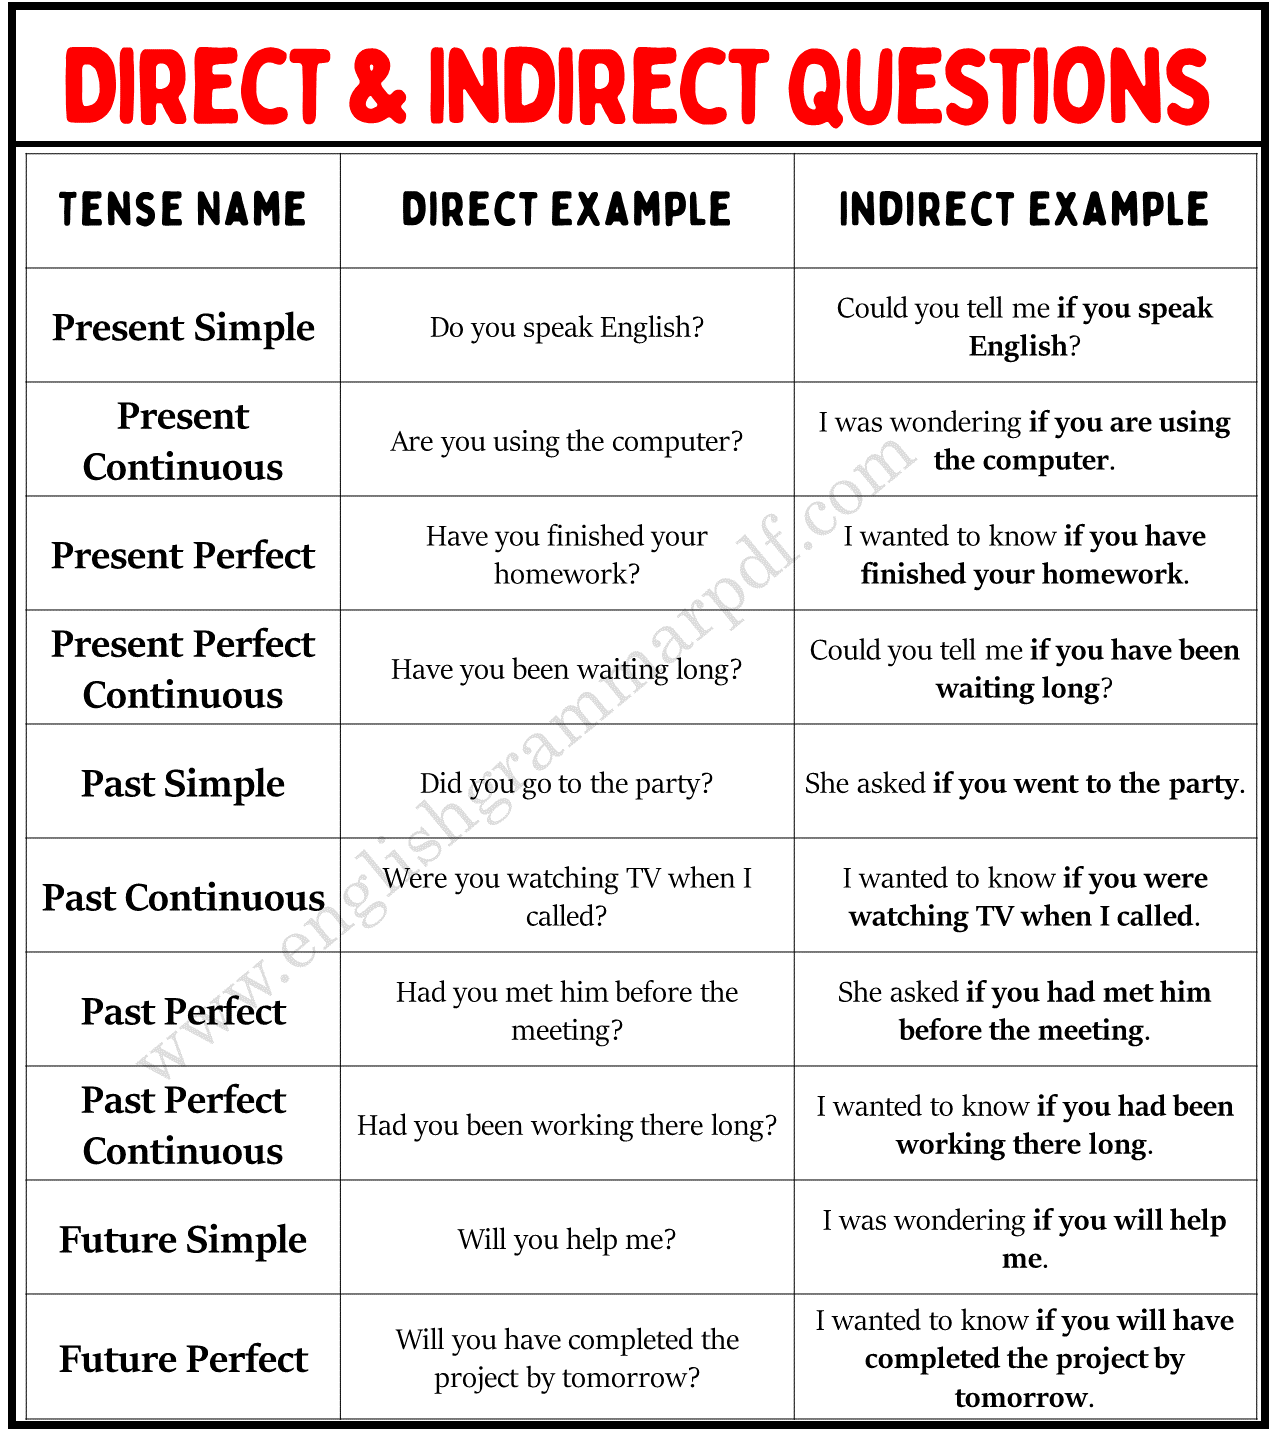 Direct and Indirect Questions Copy (2)